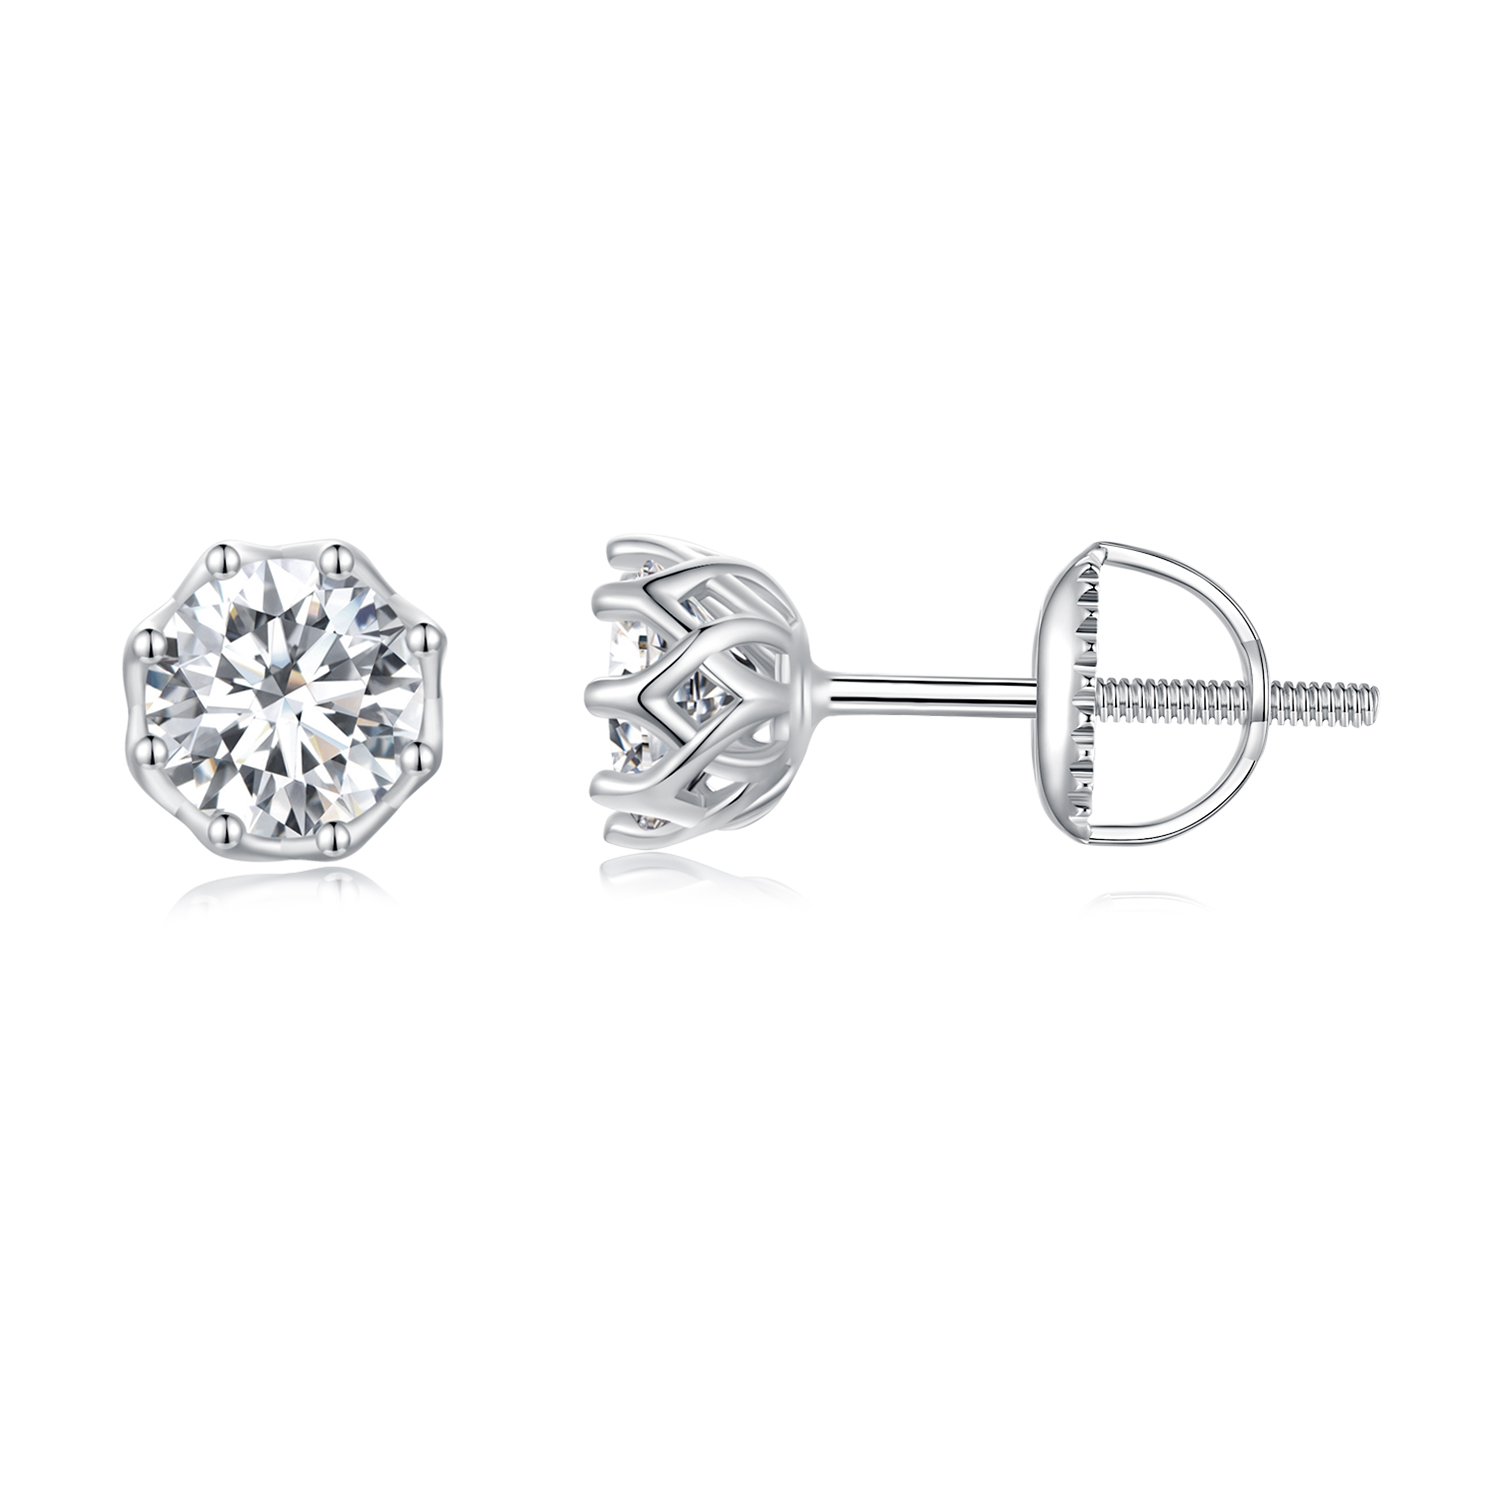 pandora style exquisite moissanite studs earrings mse016 s